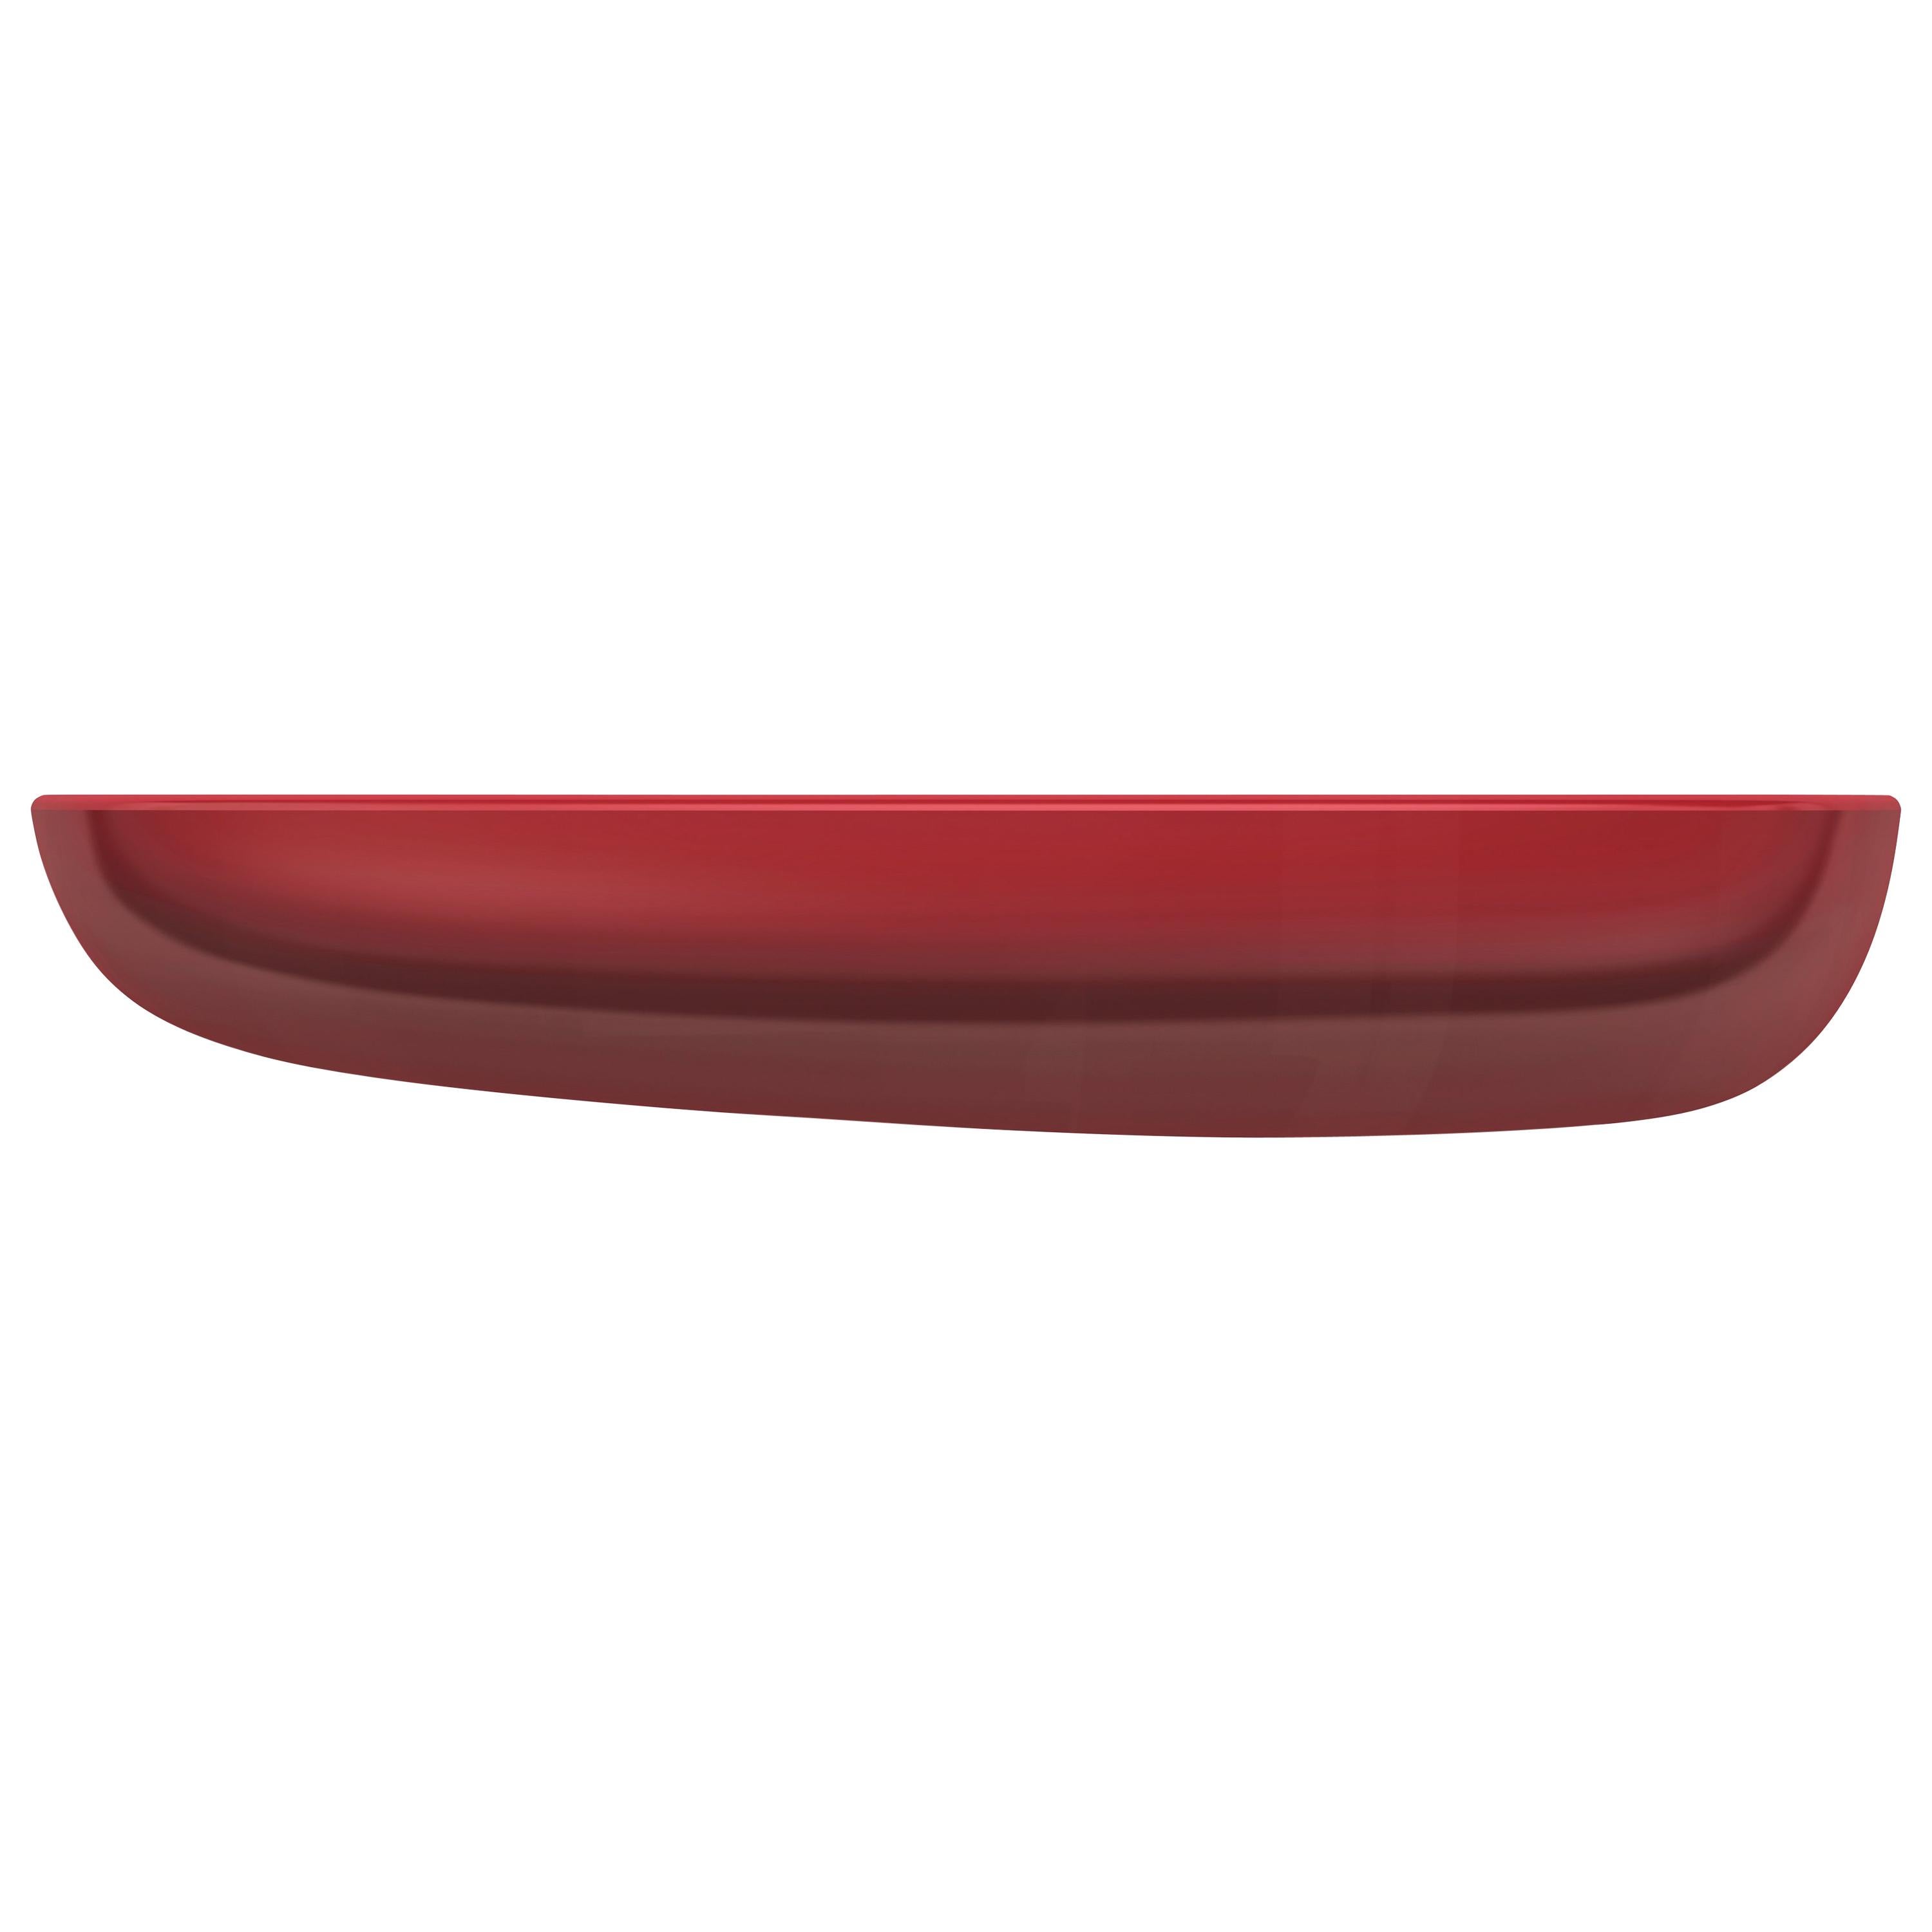 Vitra Large Corniches in Japanese Red by Ronan & Erwan Bouroullec im Angebot